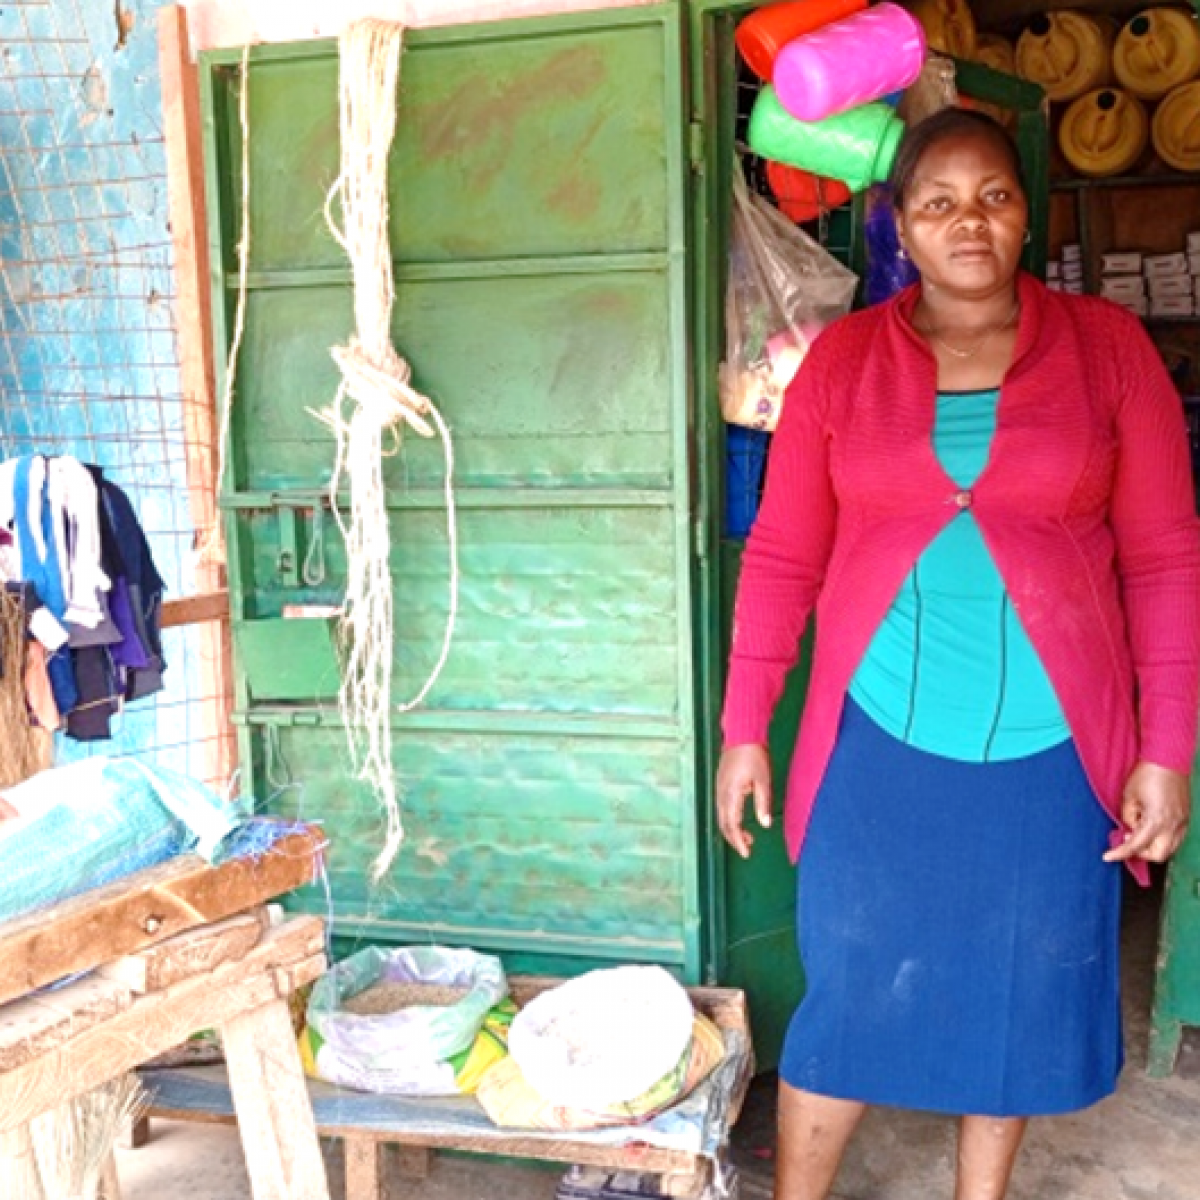 Doreen's store, which had empty shelves and limited options, transformed into a bustling hub of activity, doubling her sales from US$ 20 to US$ 50 daily. Photo credit: Jeftor Olekiremu_ACDI VOCA